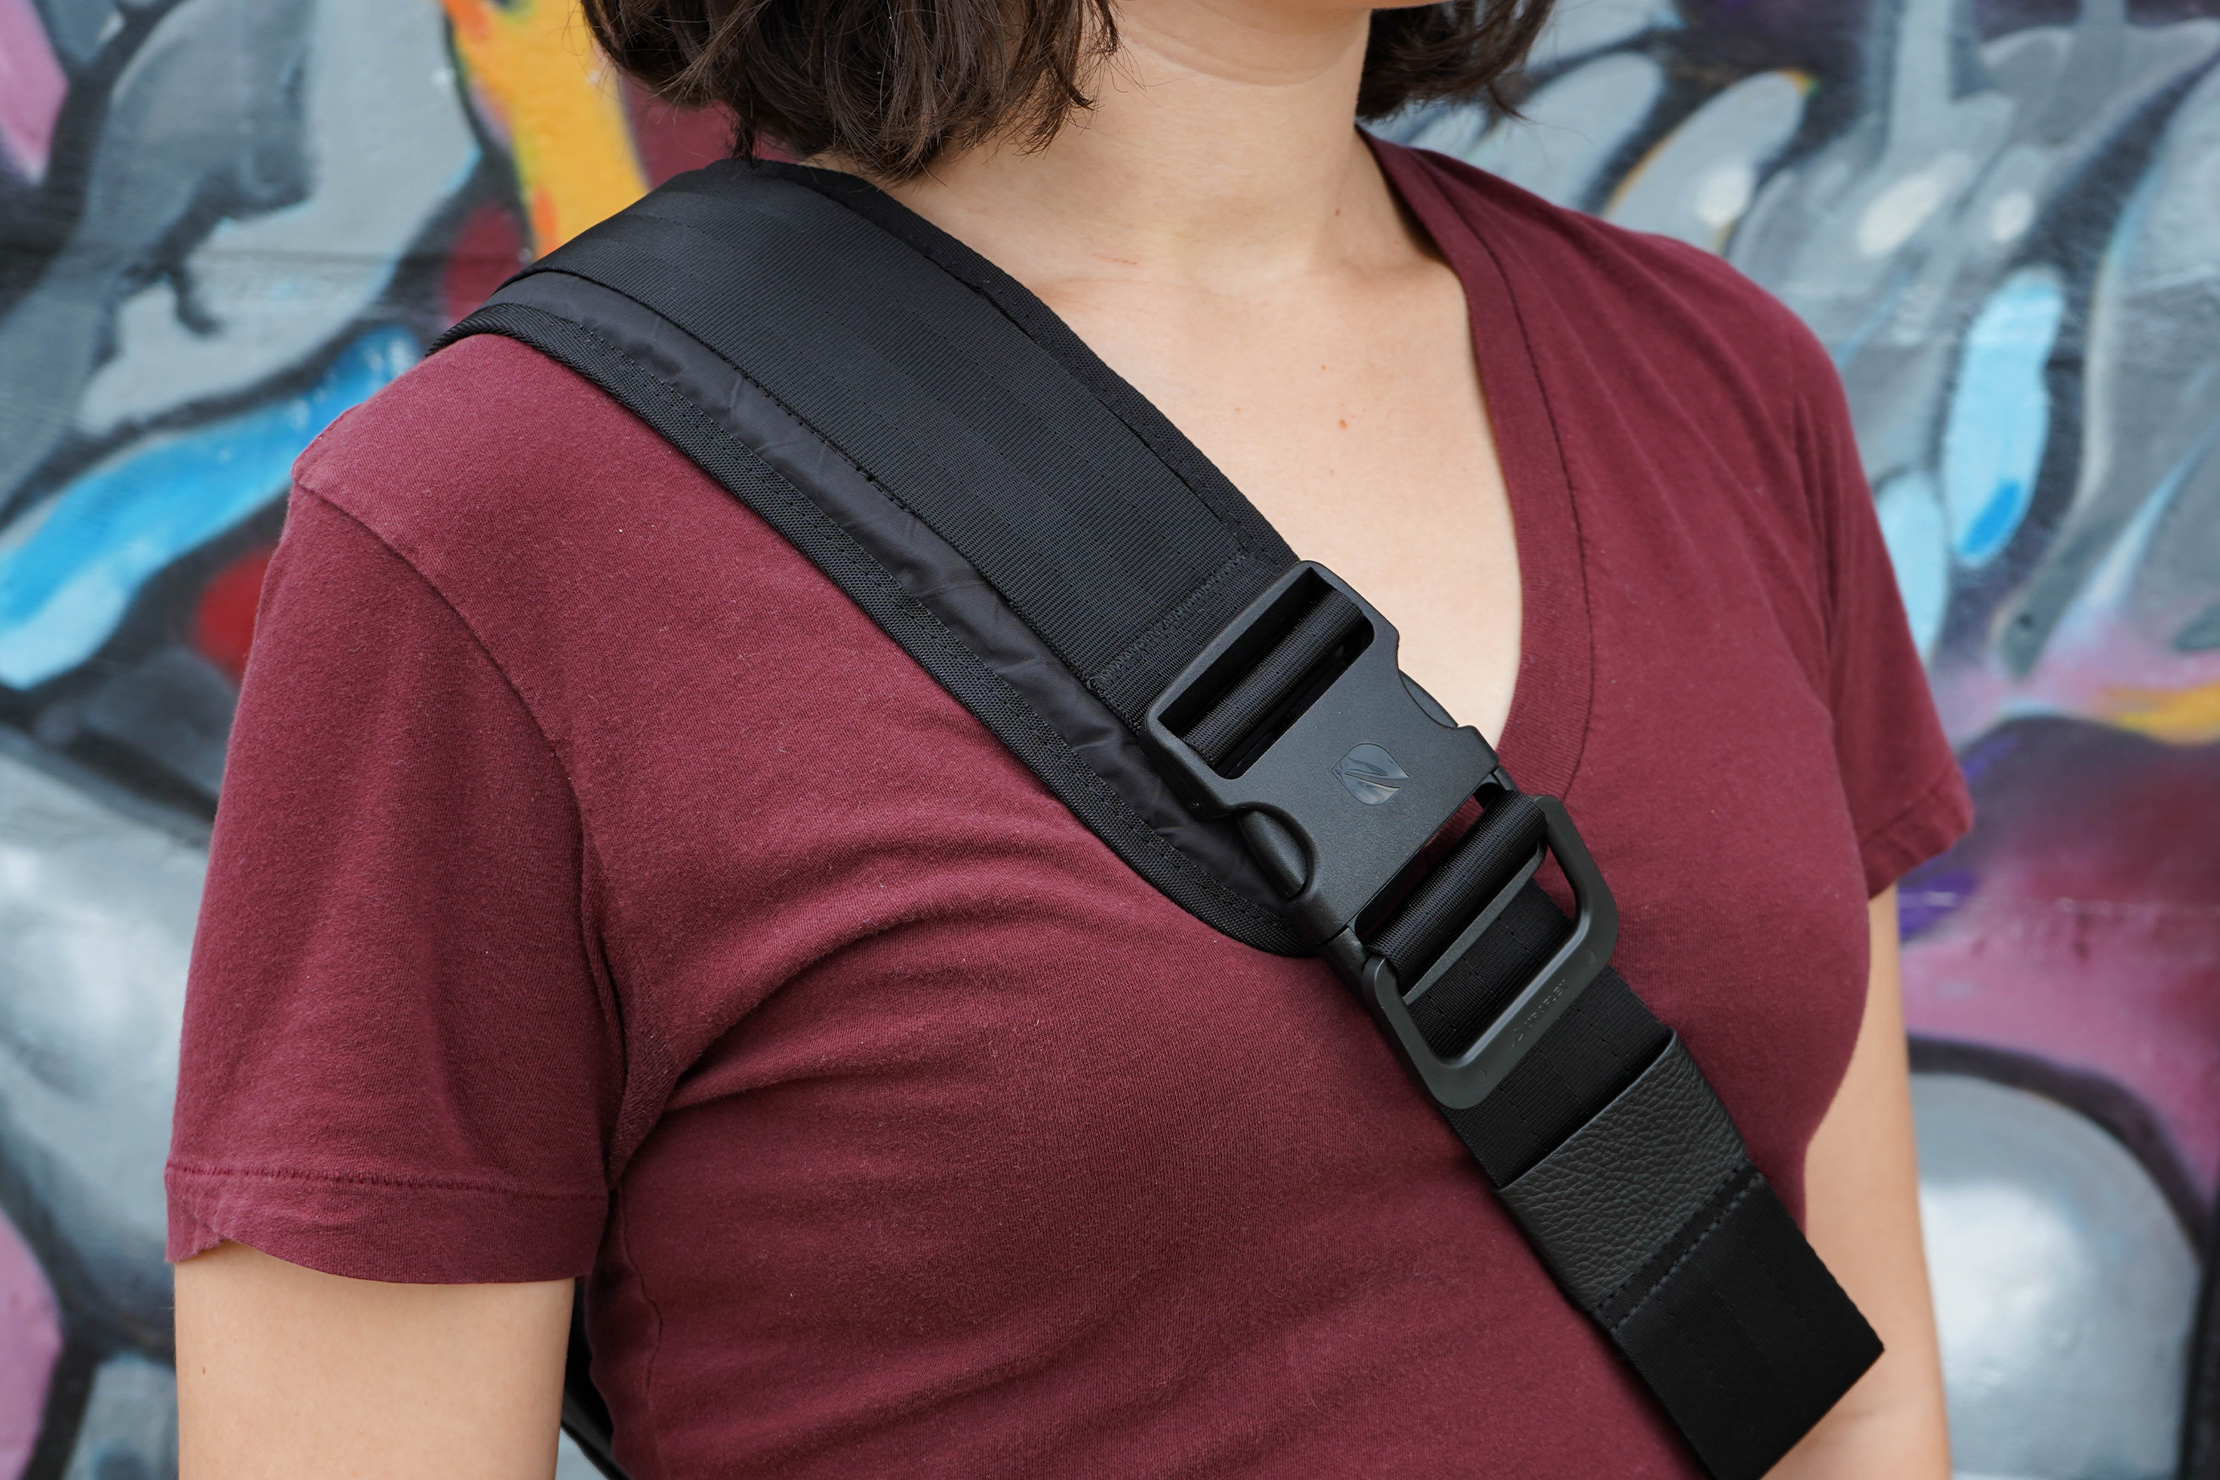 Large Duraflex Buckle on the Incase Diamond Wire Reform Sling Pack